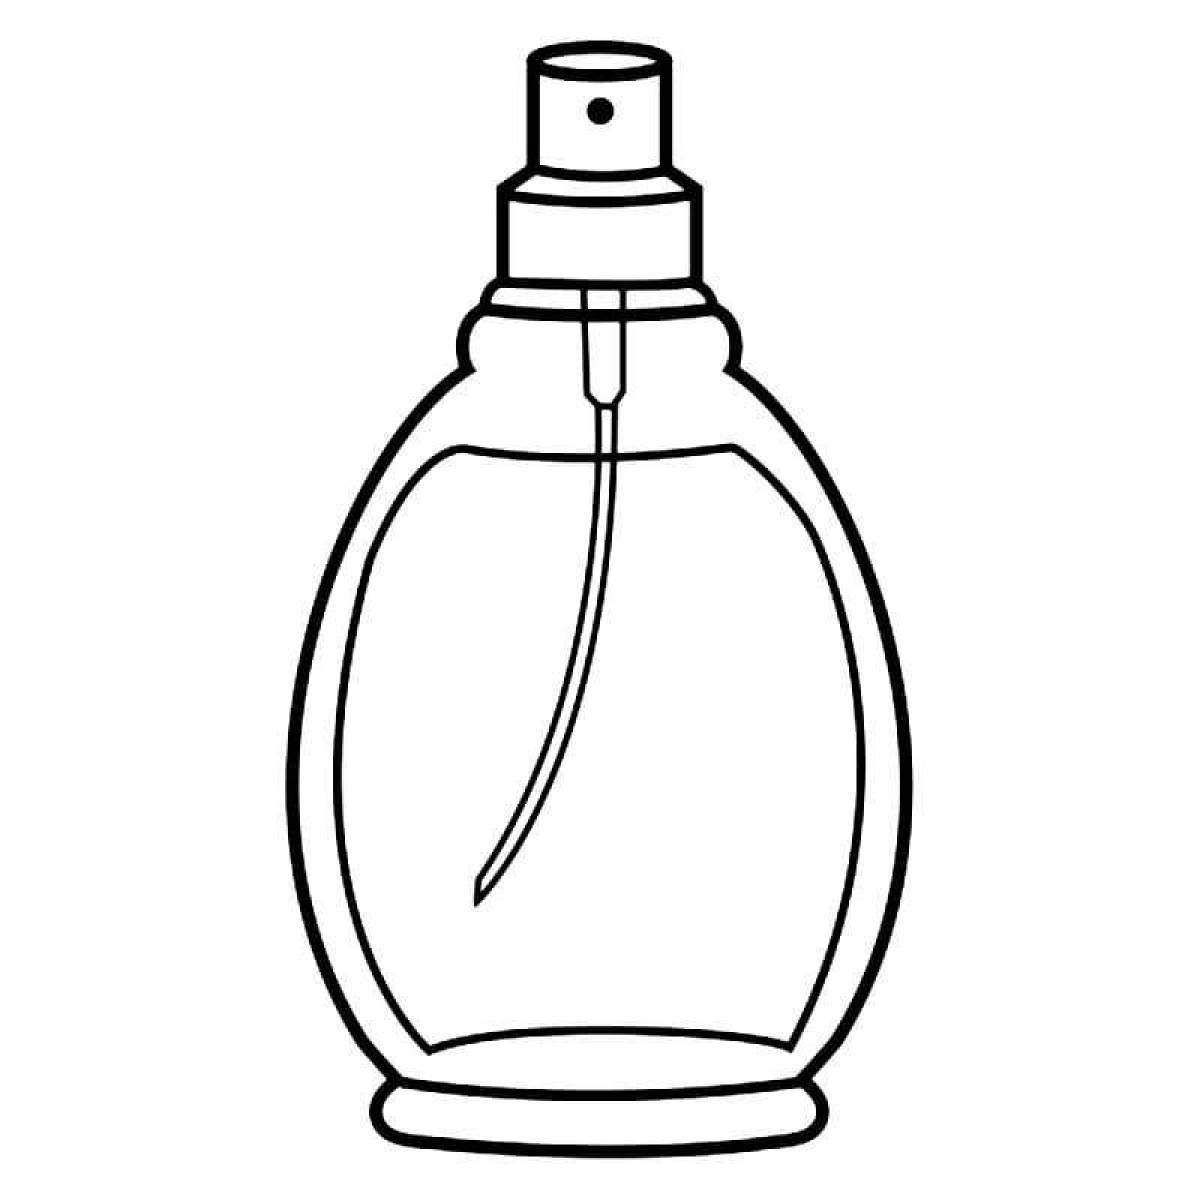 Coloring page with colorful perfume